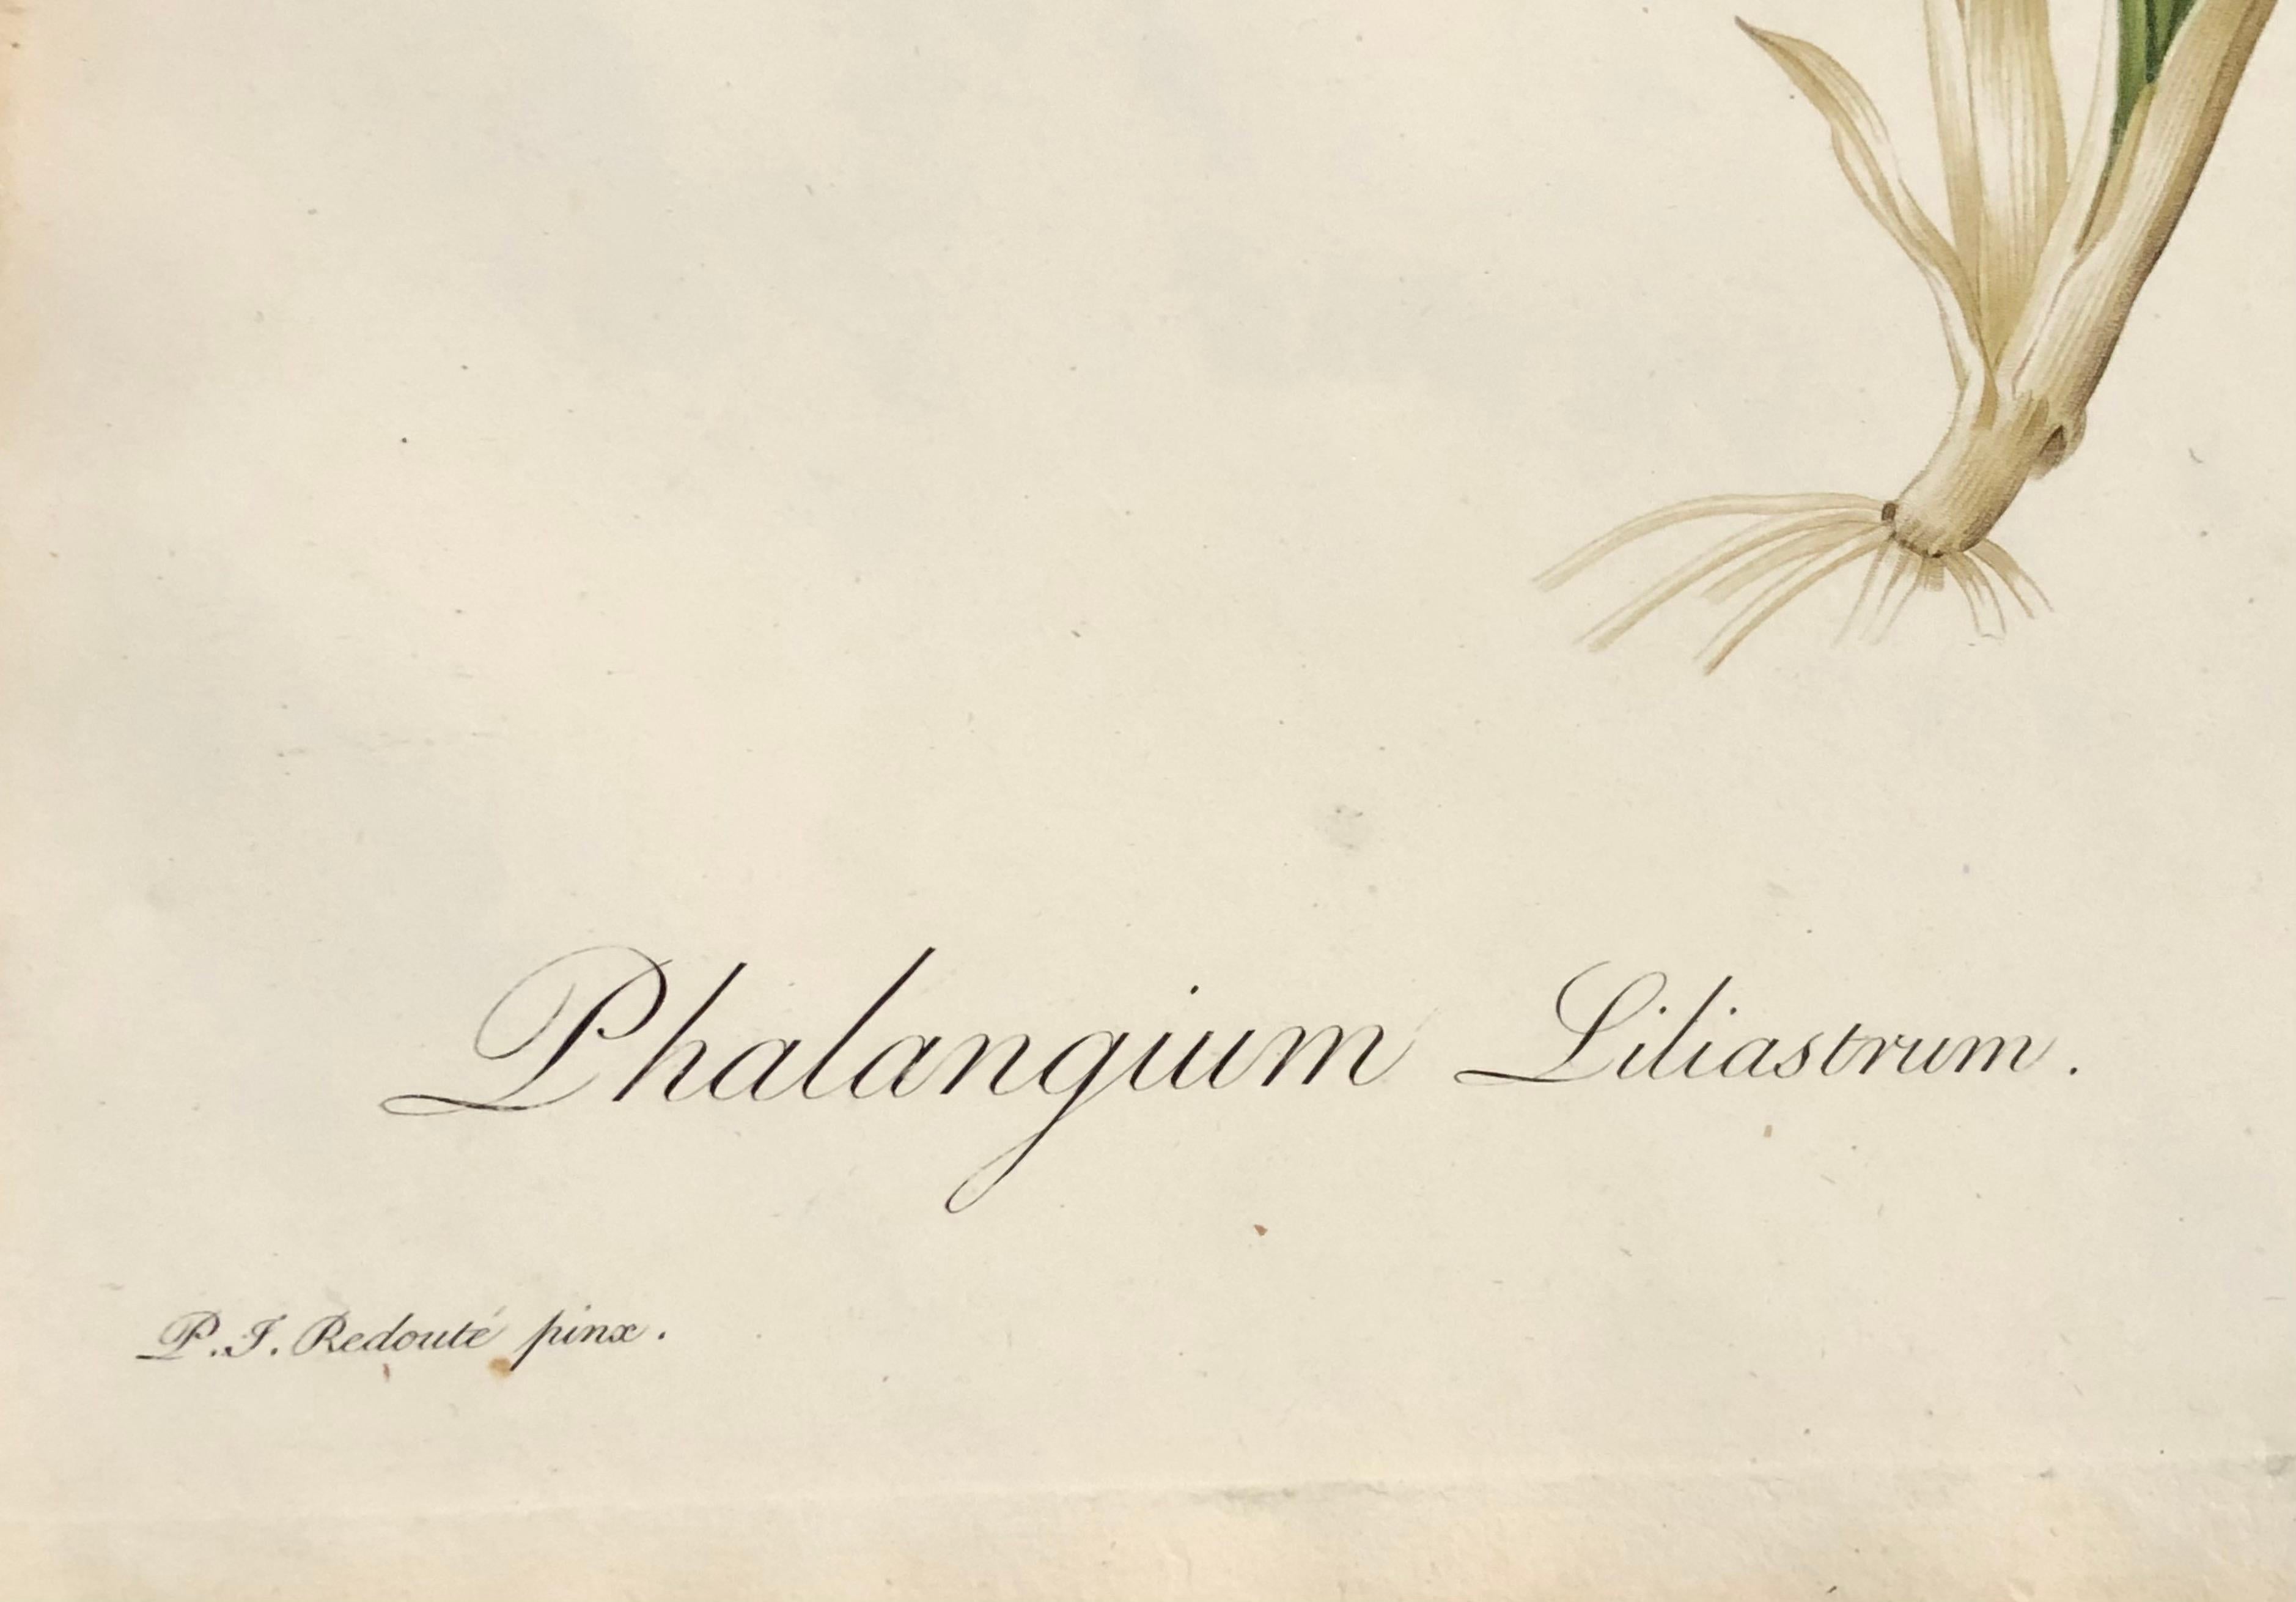 Phalangium Liliastrum Hand Painted Colored Engraving Signed P.J. Redoute For Sale 6